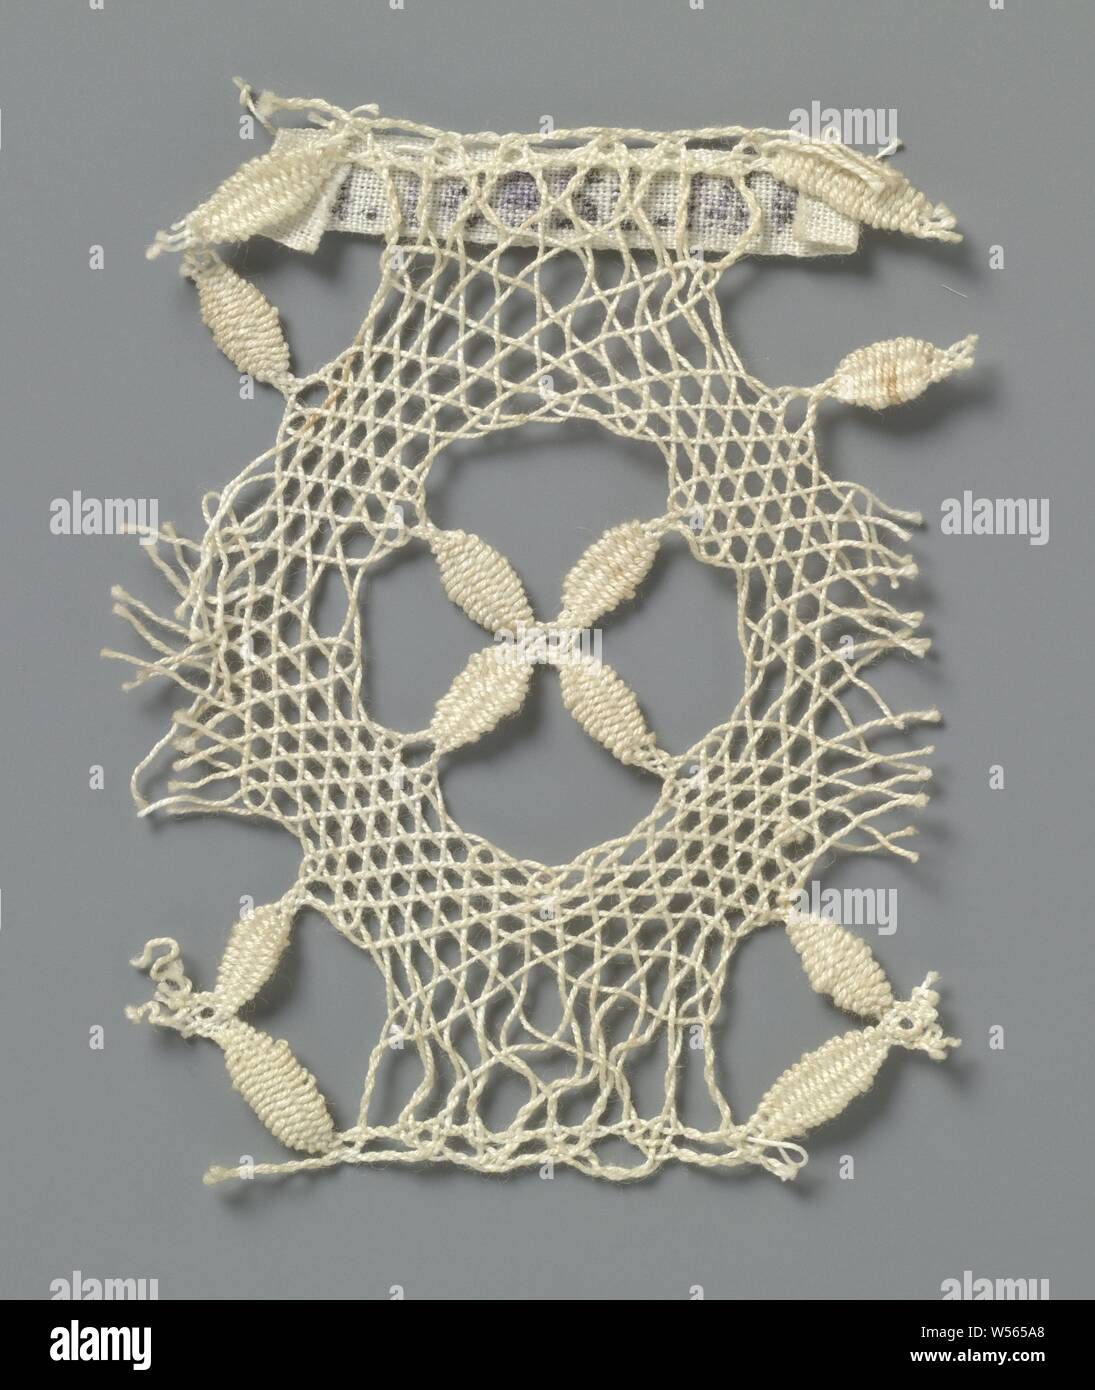 Strip of bobbin lace with a cross of four leaves, Strip of natural-colored bobbin lace, lace. The strip is short, only a part of the pattern is visible. Made in a sort of octagonal shape in net stroke, an openwork center is made with a cross of four leaves made in shape stroke. These crosses in a cut-away part repeat themselves along the top and bottom of the strip, but only a part of it is visible. The top and bottom of the strip are finished straight., anonymous, Brasil, c. 1800 - c. 1899, linen (material), torchon lace, l 4.5 cm × w 6.5 cm Stock Photo